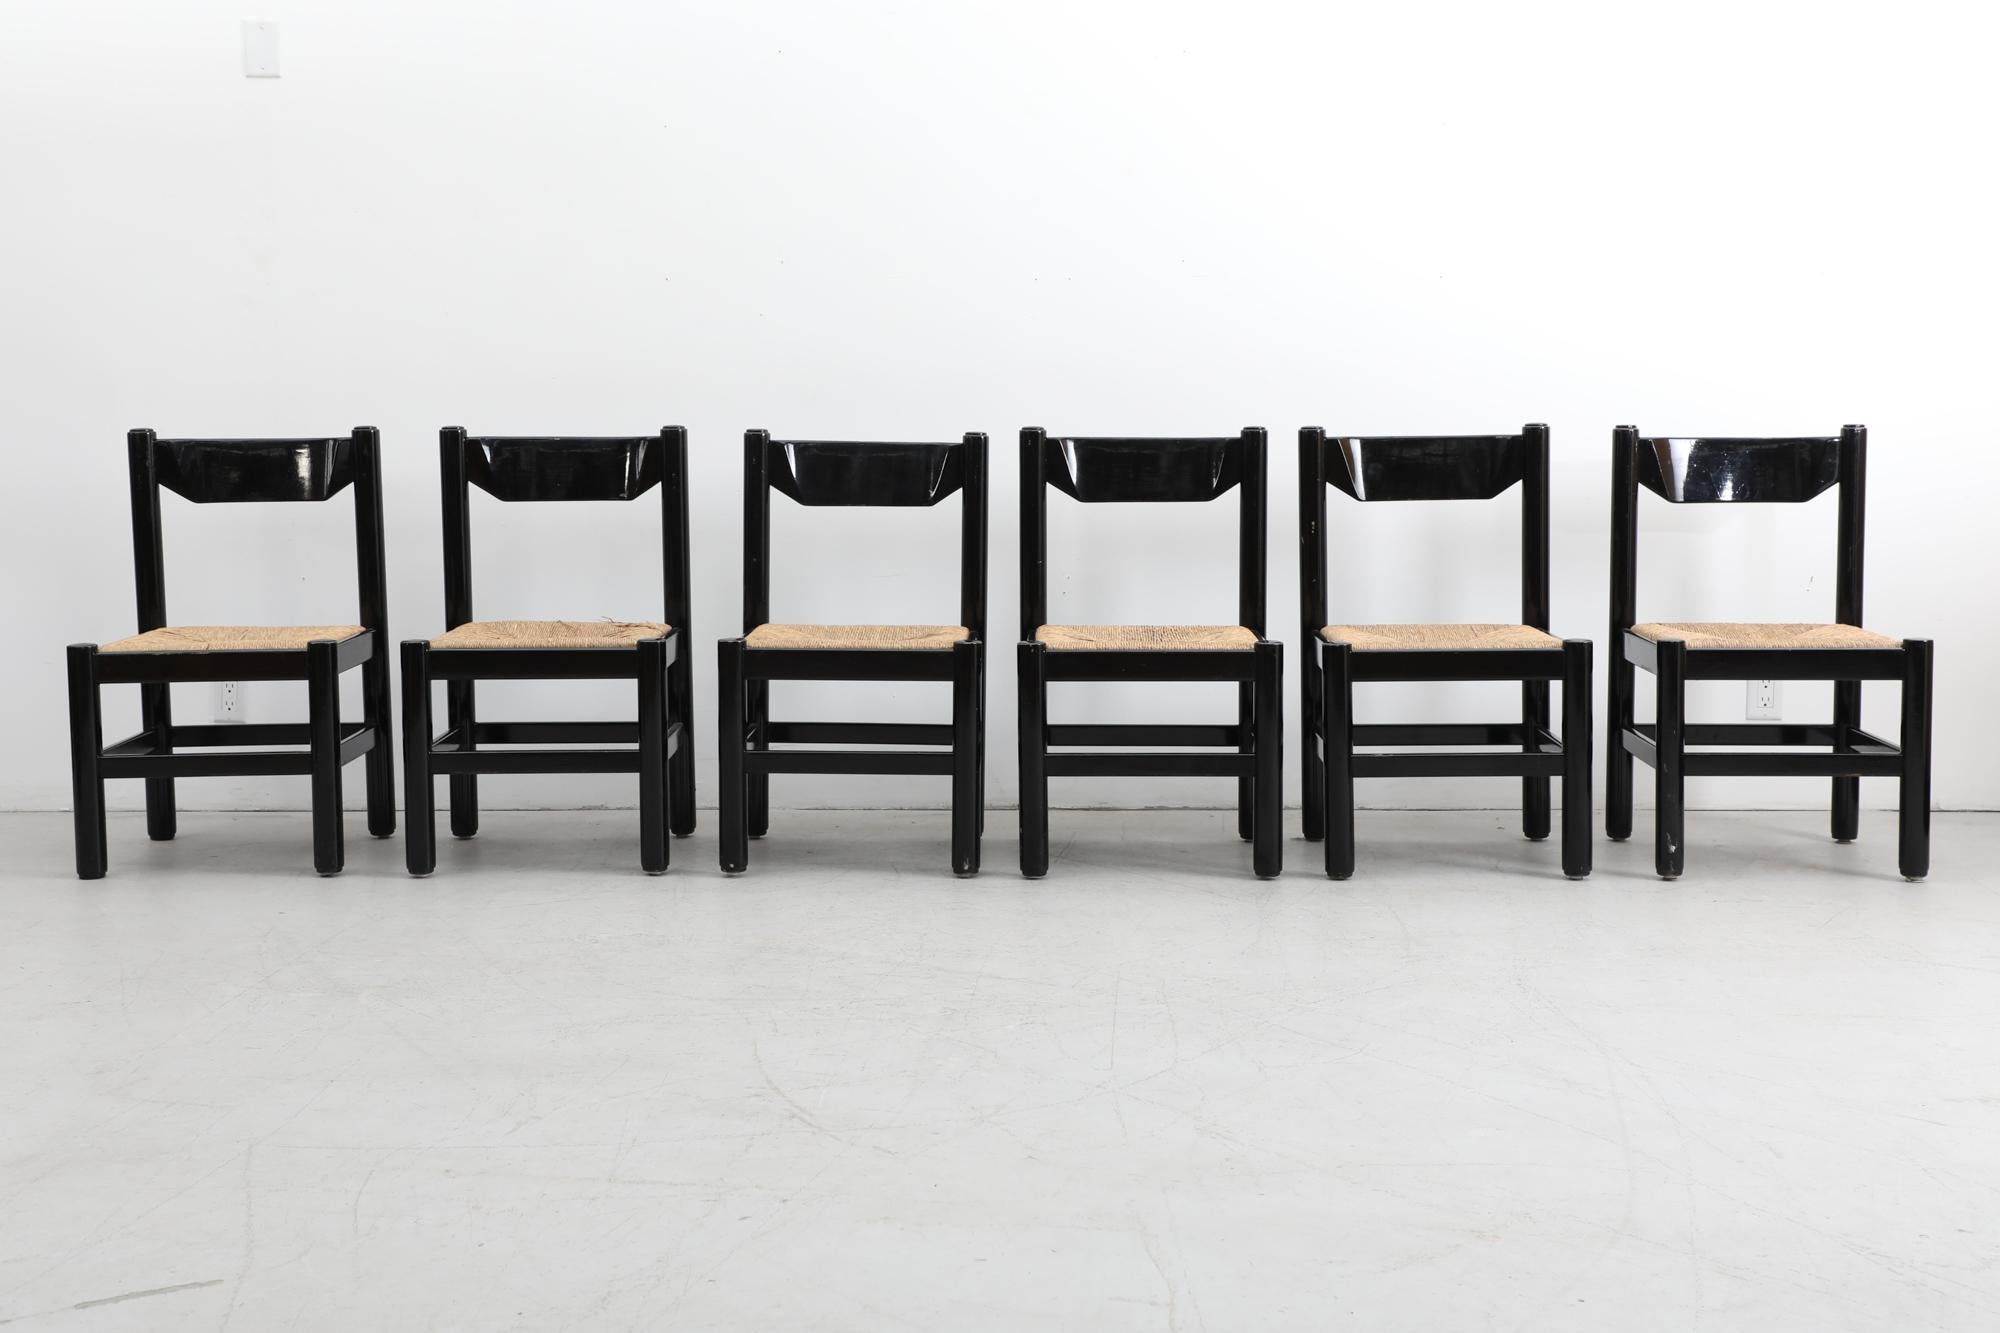 Set of 6 Vico Magistretti style side chairs with woven rush seats and black lacquered wood frames. The rush seats fit snugly inside the frames and are not fastened to the chairs. In original condition with some visible wear consistent with their age